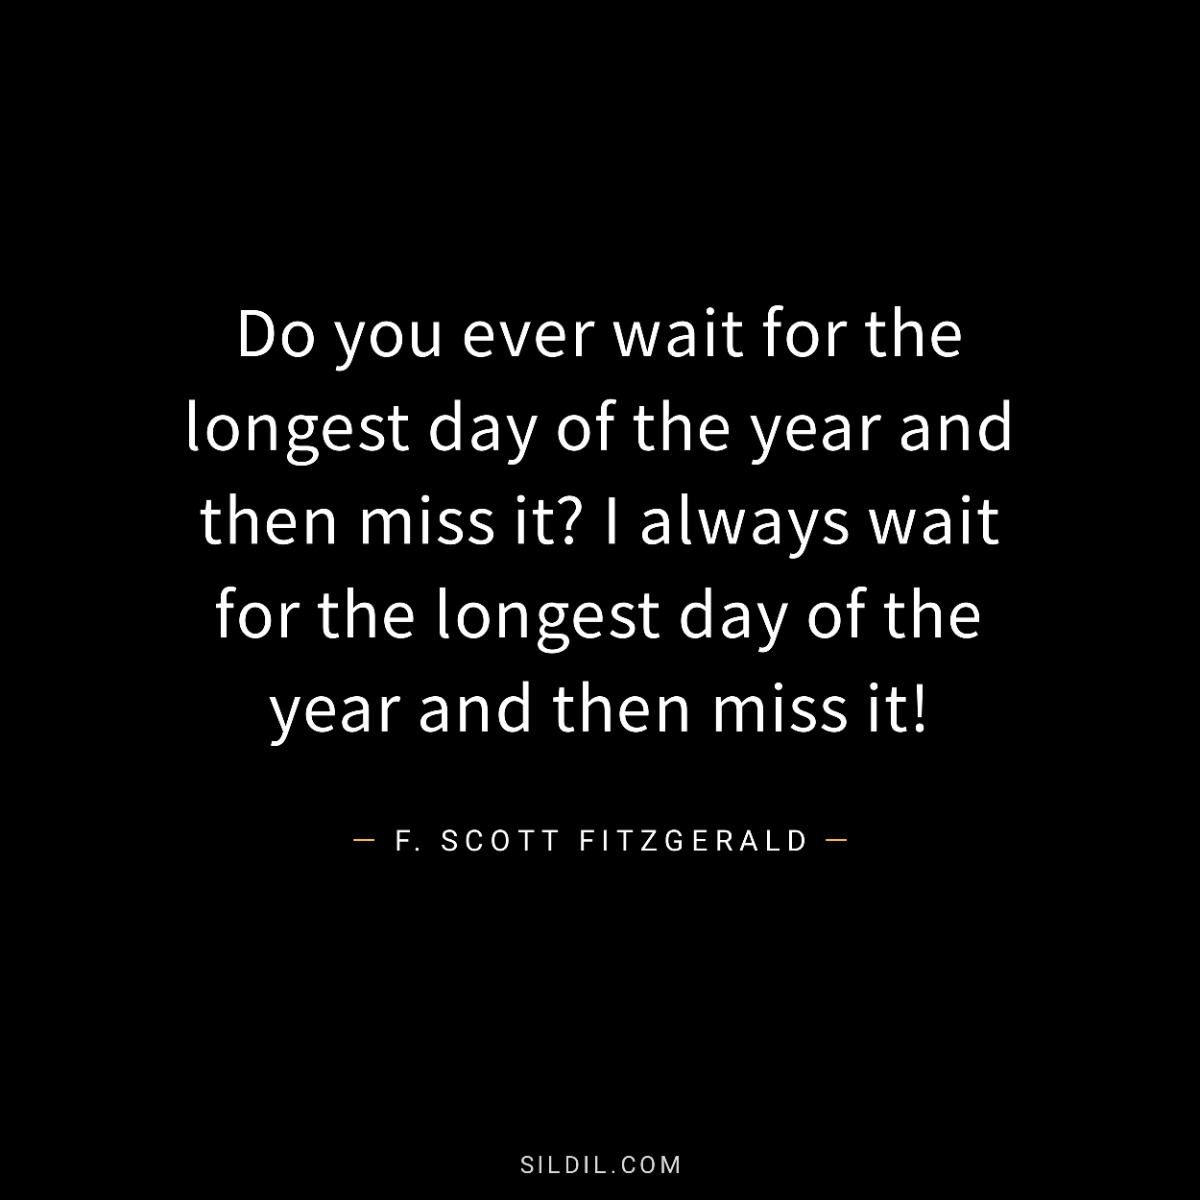 Do you ever wait for the longest day of the year and then miss it? I always wait for the longest day of the year and then miss it!